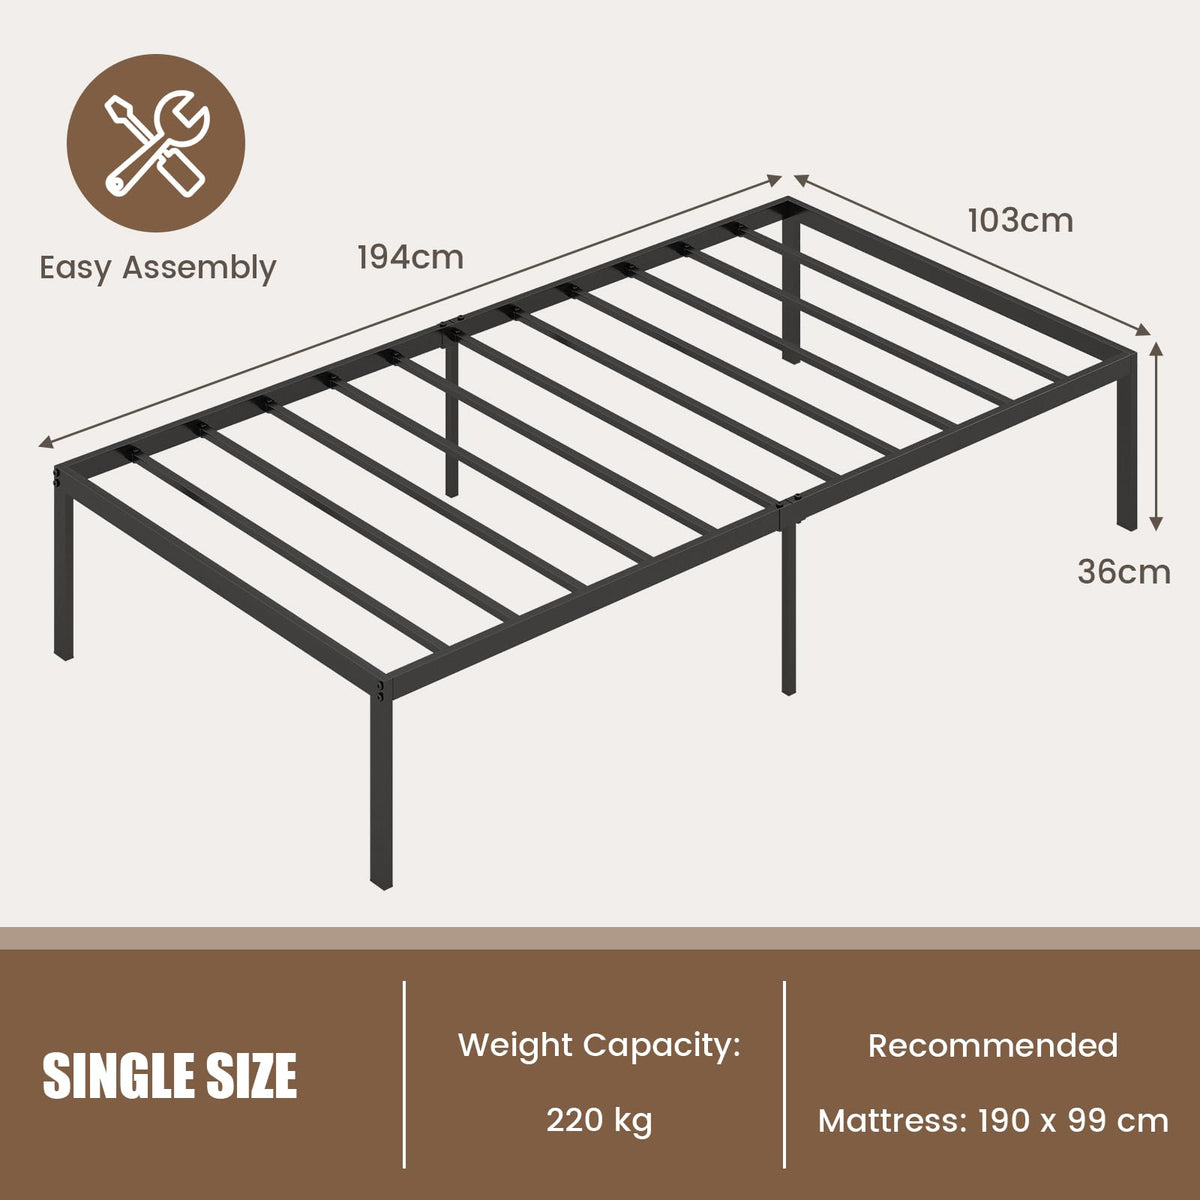 Giantex Twin Size Platform Bed Frame, 36 cm High Heavy-Duty Metal Bed Base with Under Bed Storage Space